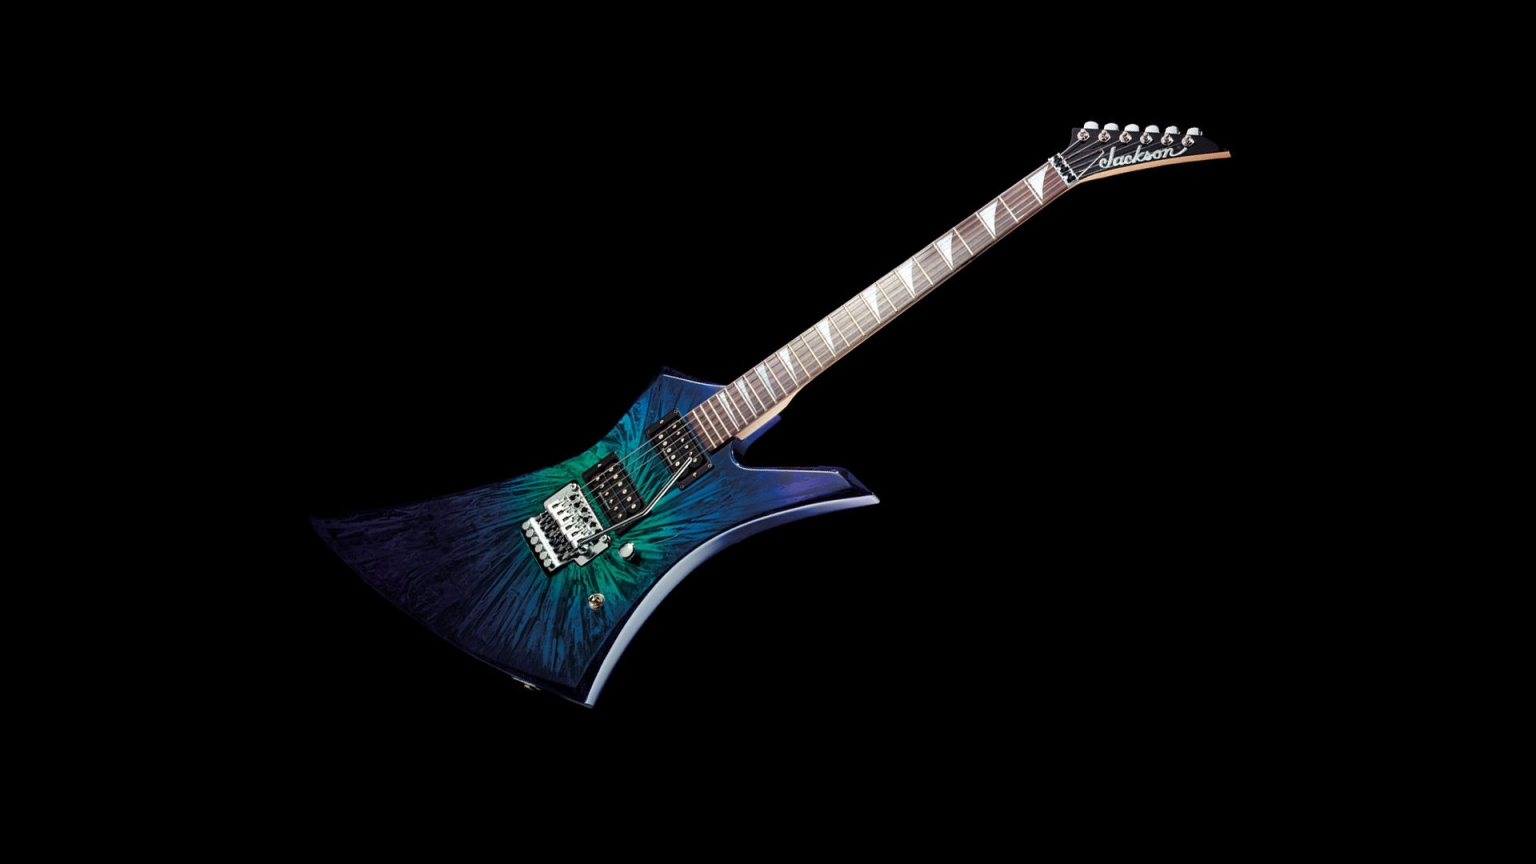 Colourful Guitar for 1536 x 864 HDTV resolution